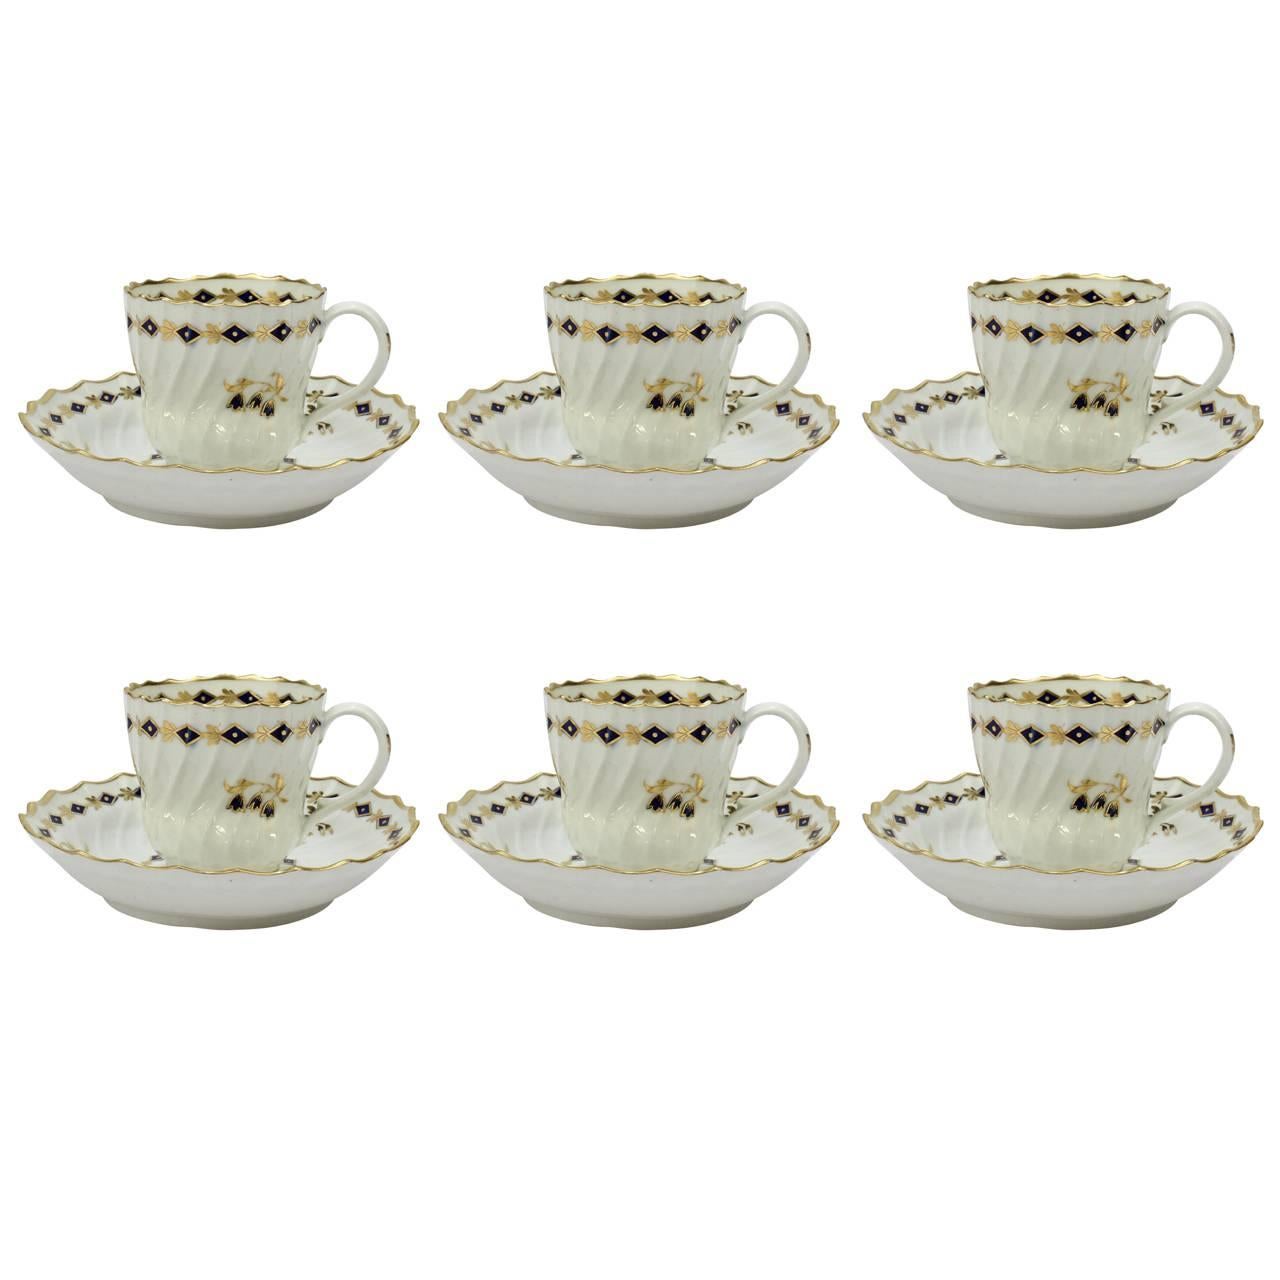 Set of Six 18th Century Flight Worcester Porcelain Tea Cups and Saucers